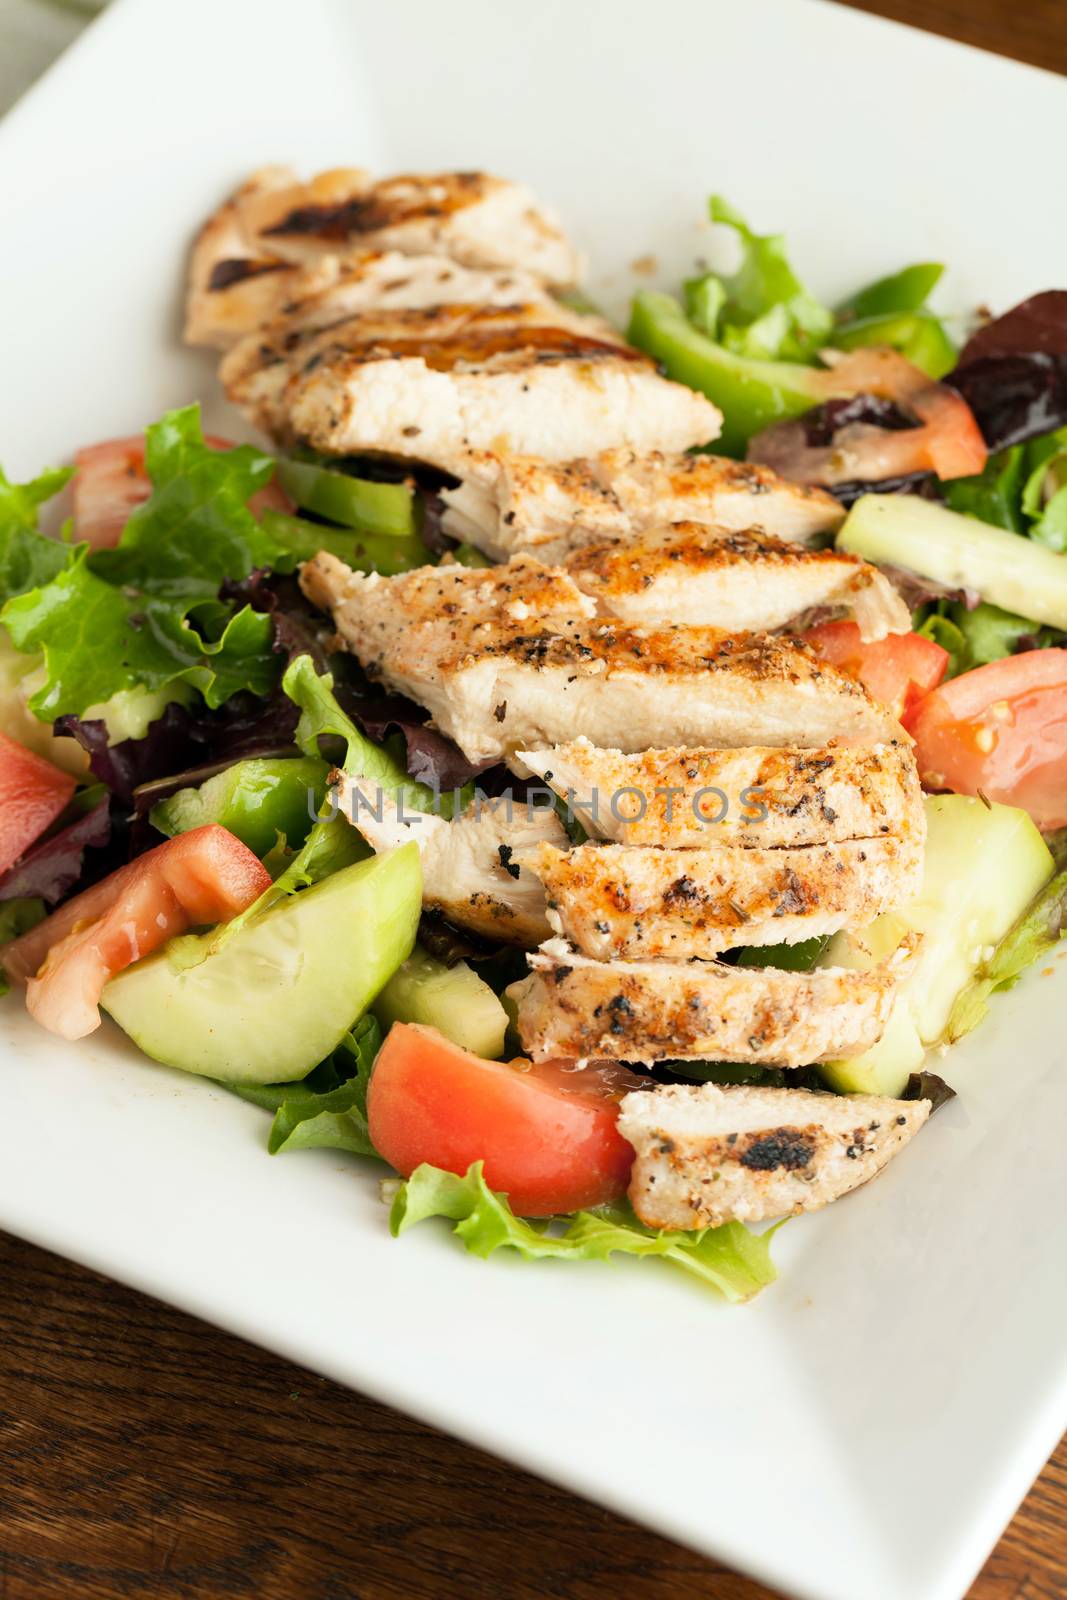 Delicious Grilled Chicken Salad by graficallyminded